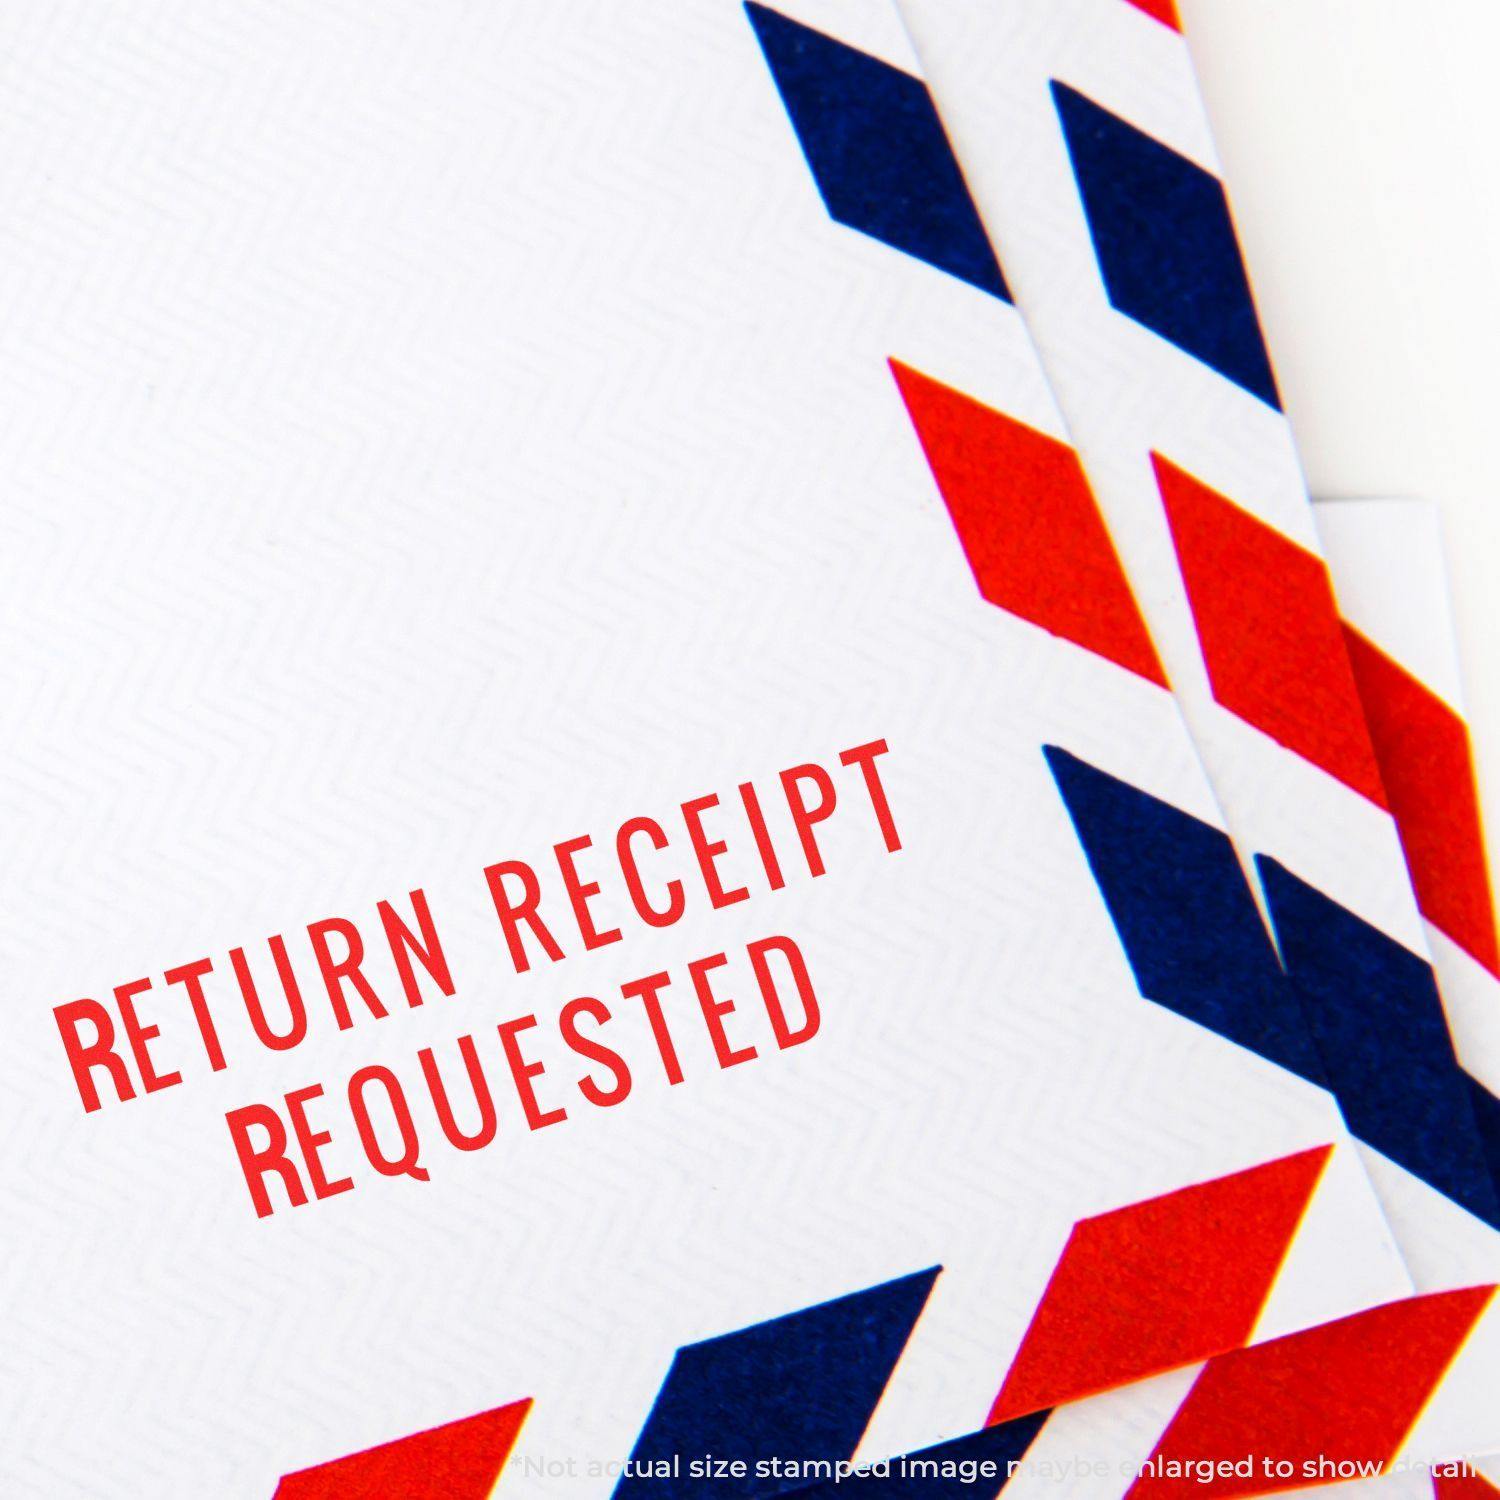 In Use Large Pre-Inked Narrow Font Return Receipt Requested Stamp Image